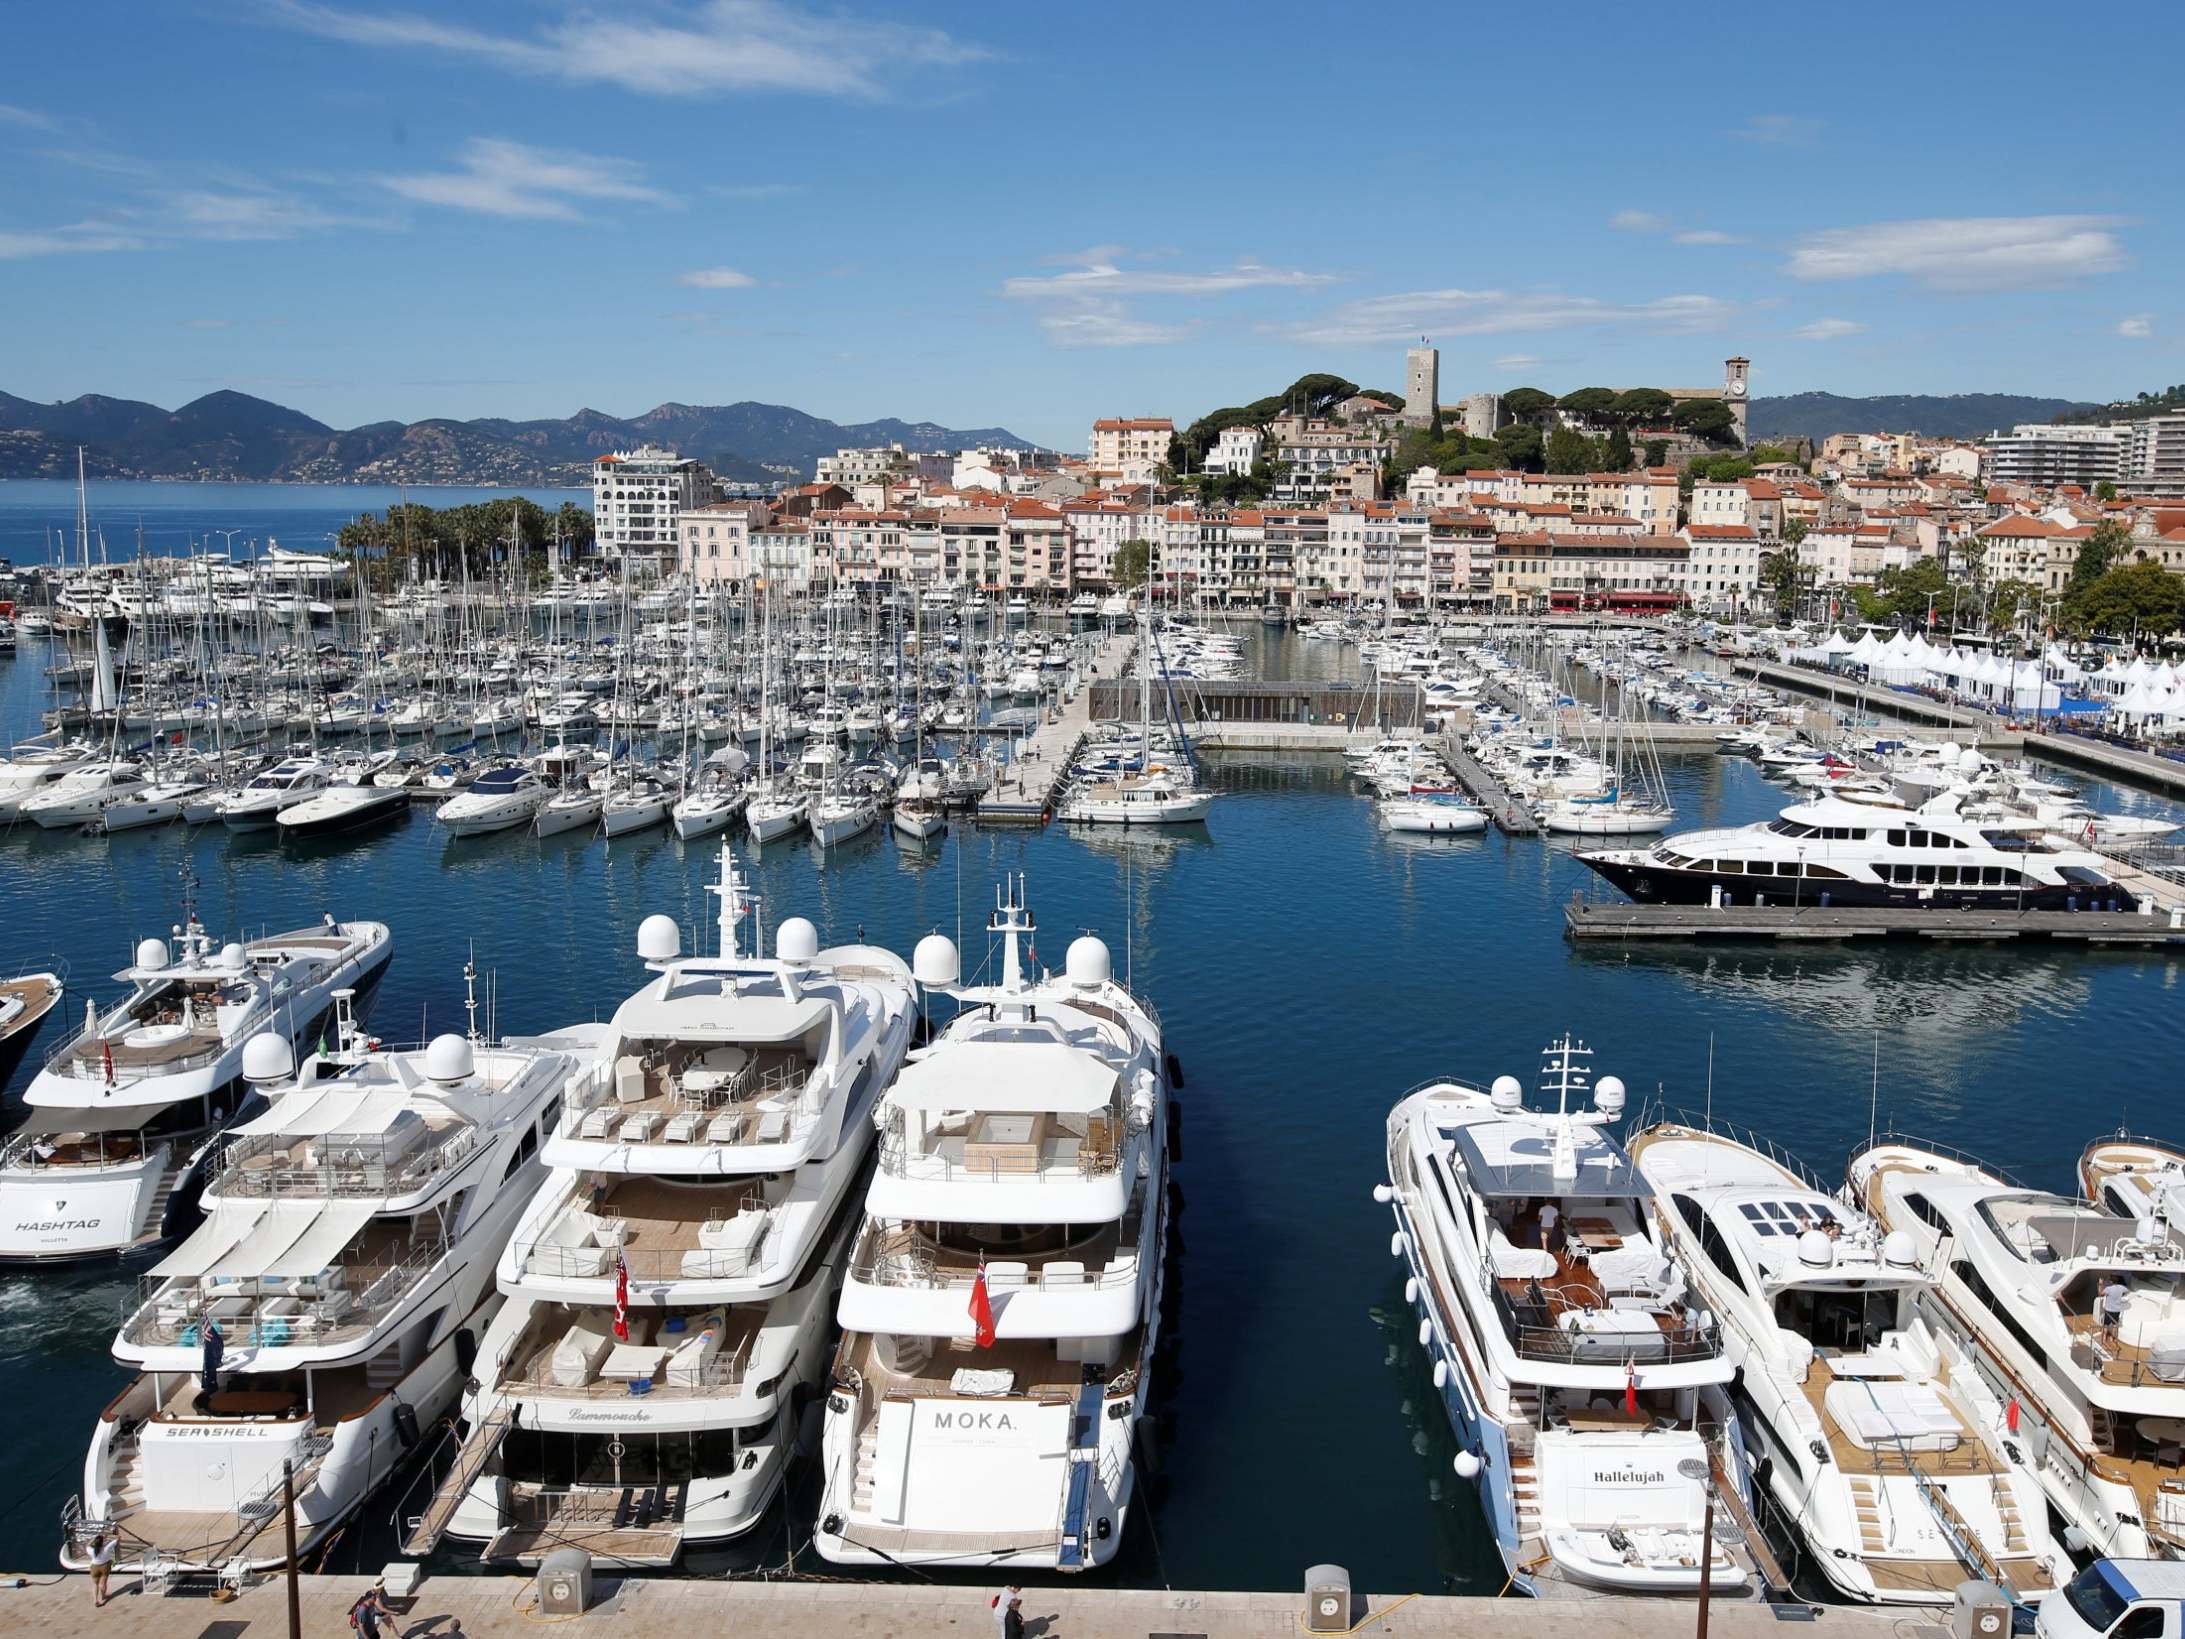 British man dies after two yachts collide at Cannes